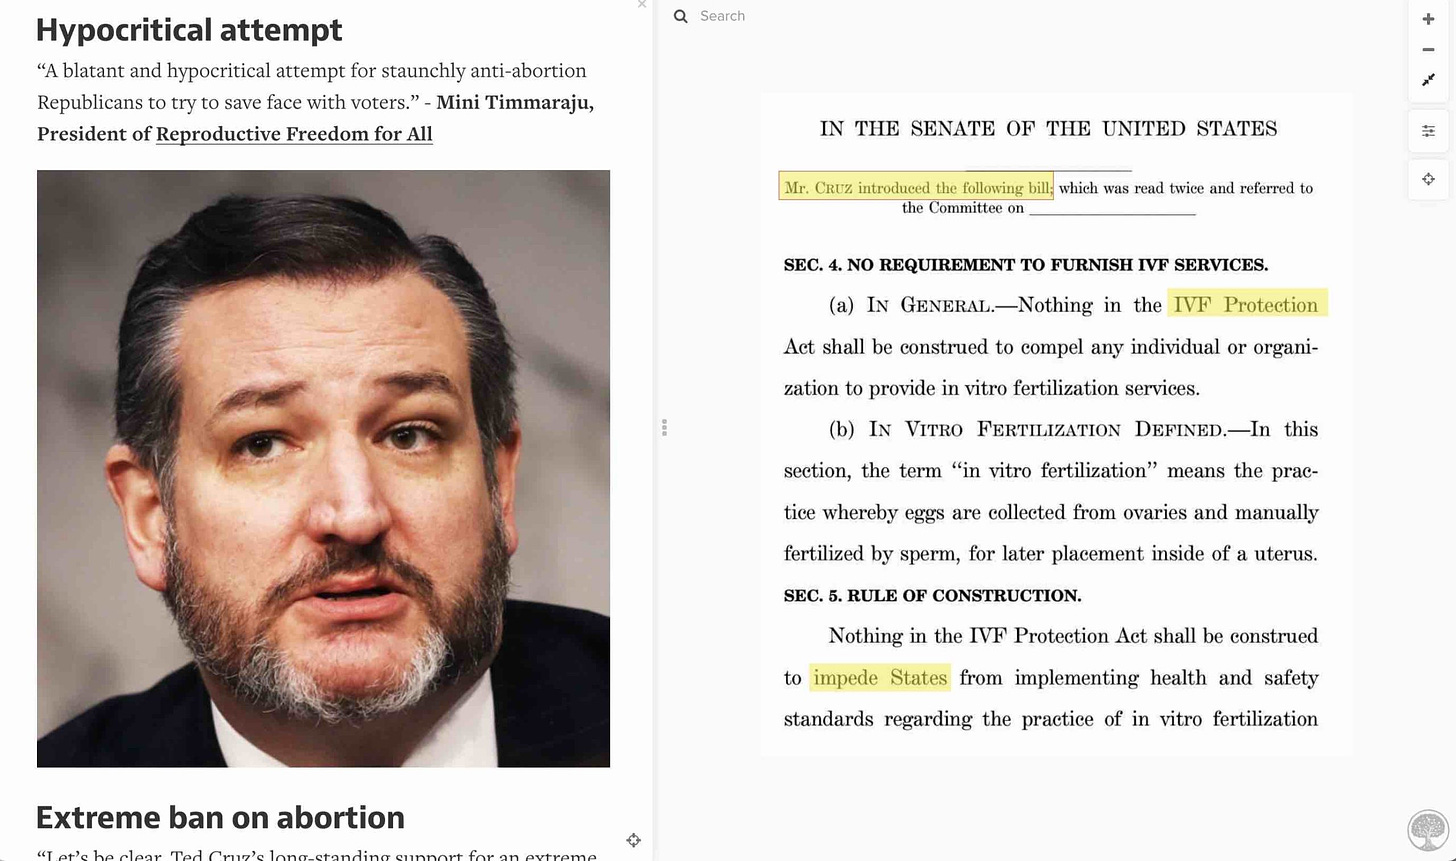 Ted Cruz back peddles from IVF ban